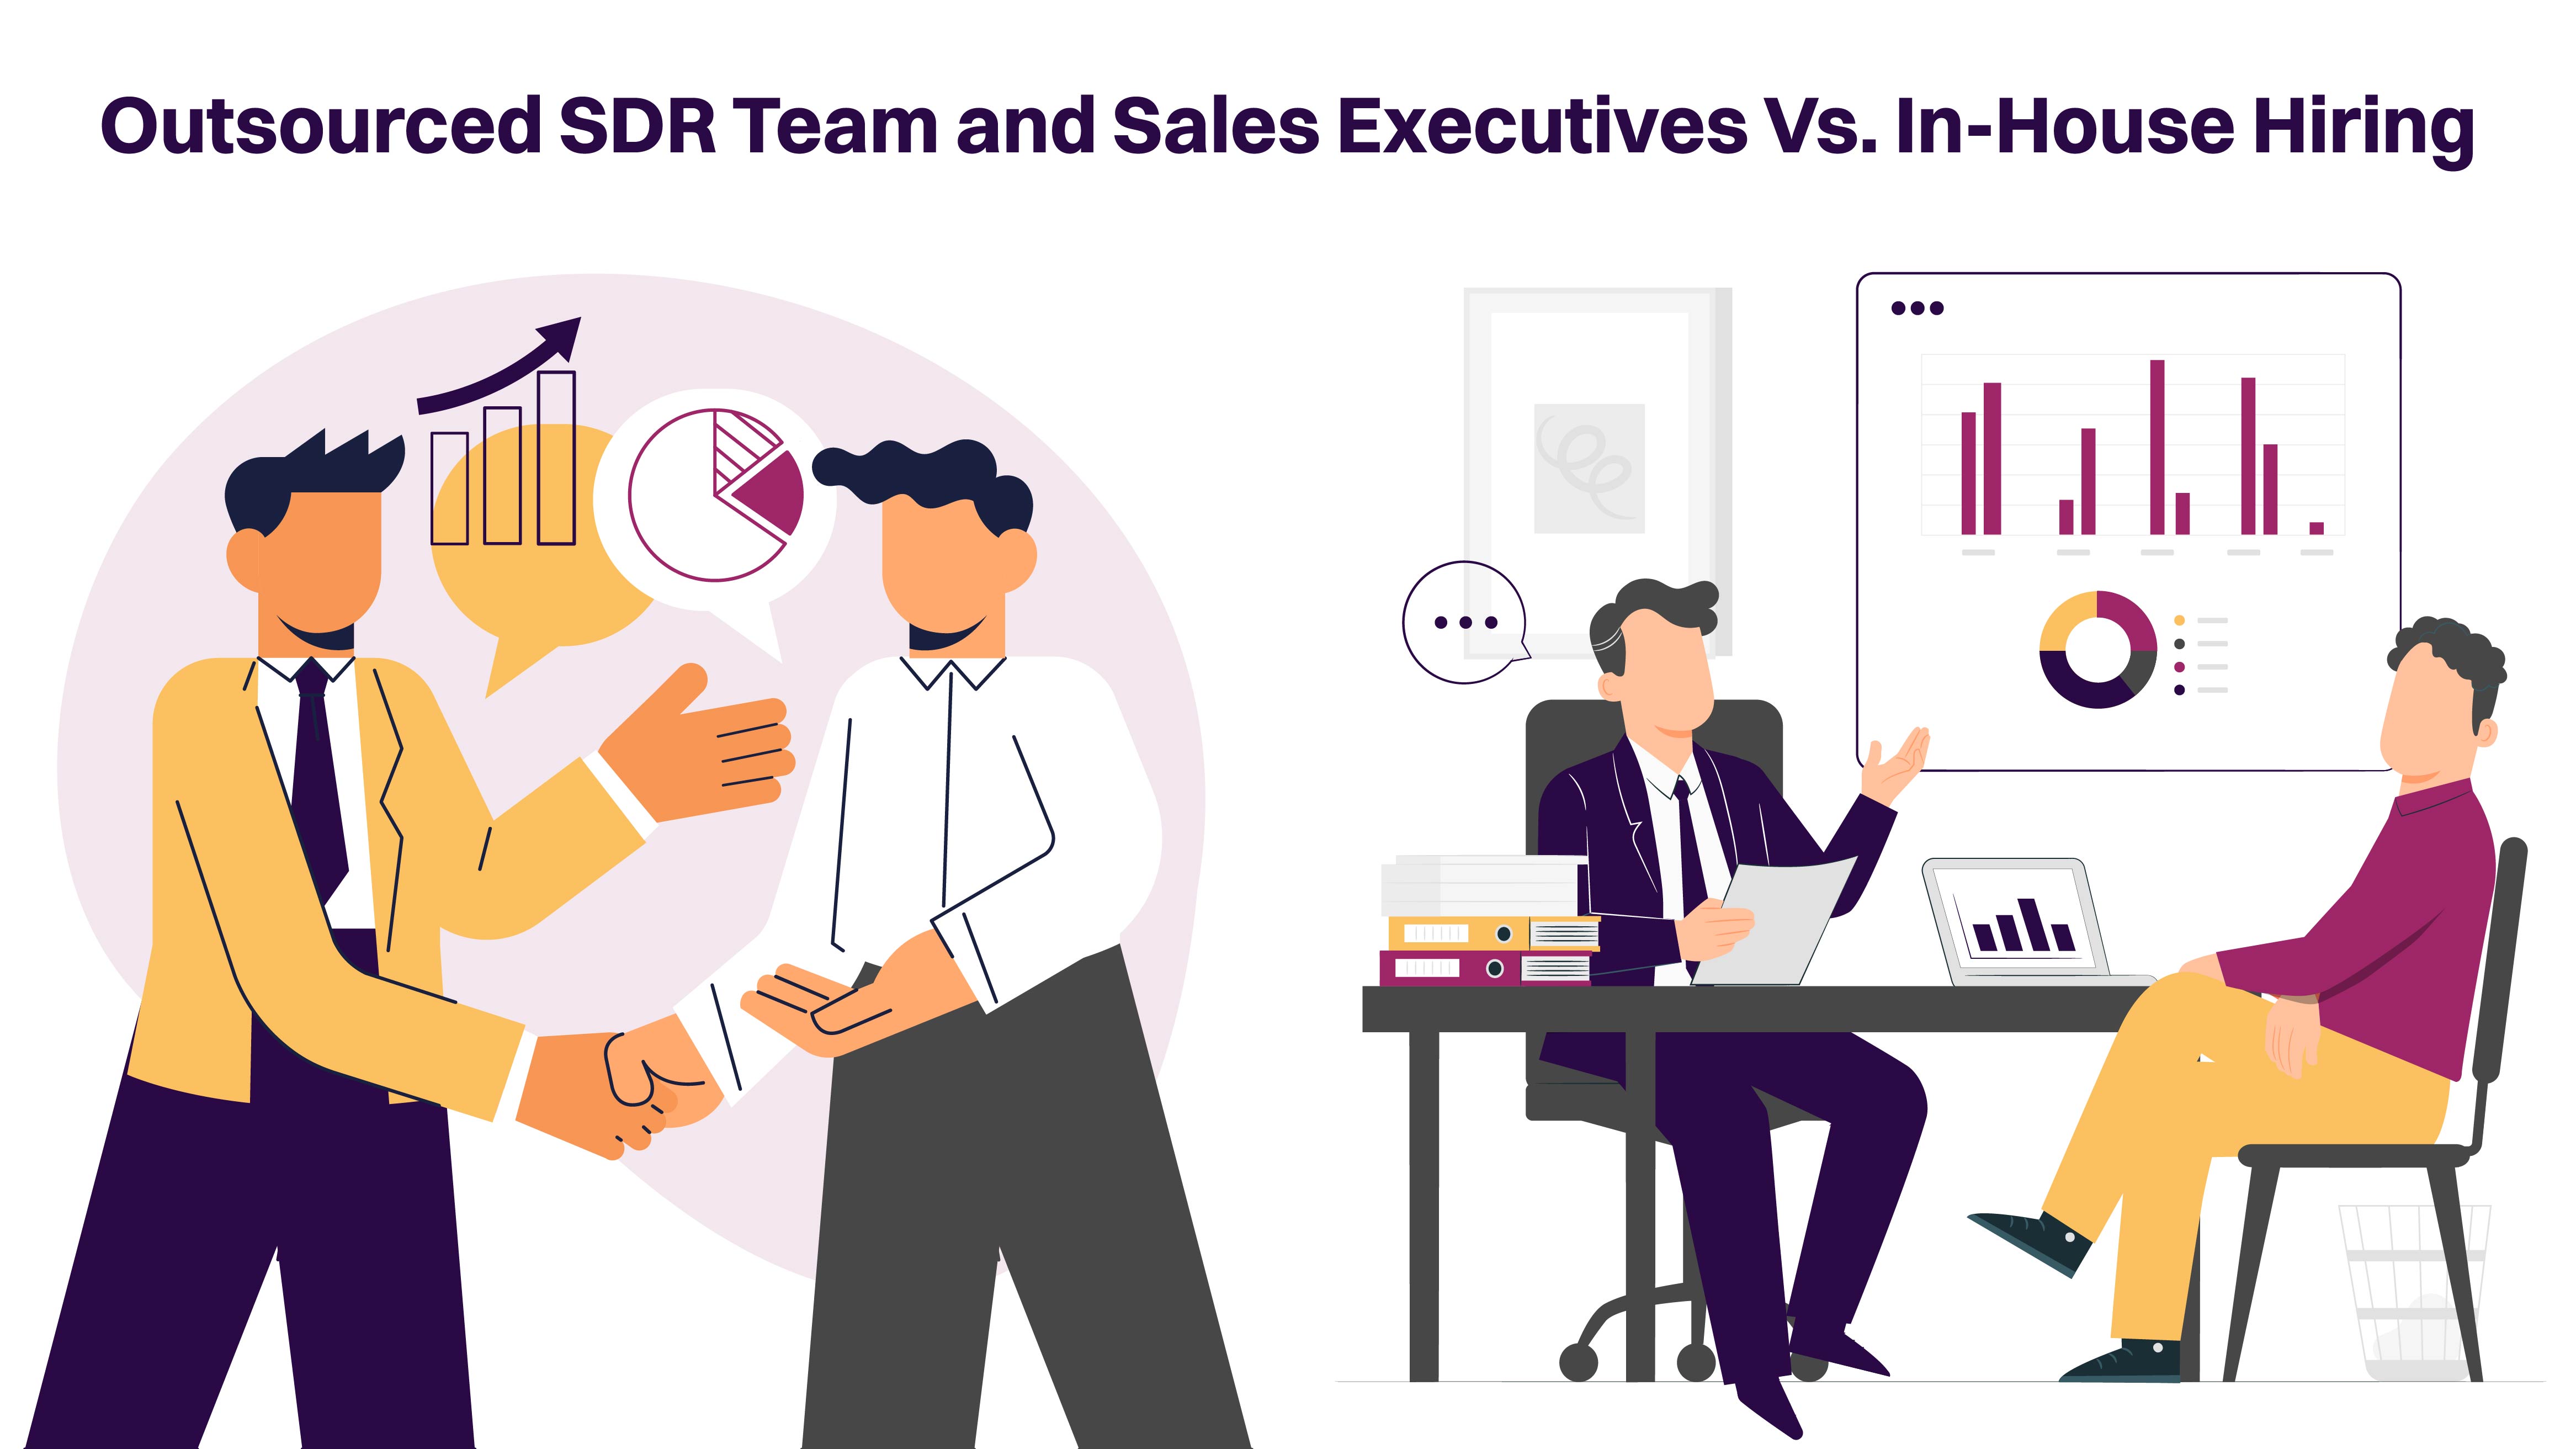 Outsourced SDR Team and Sales Executives Vs. In-House Hiring